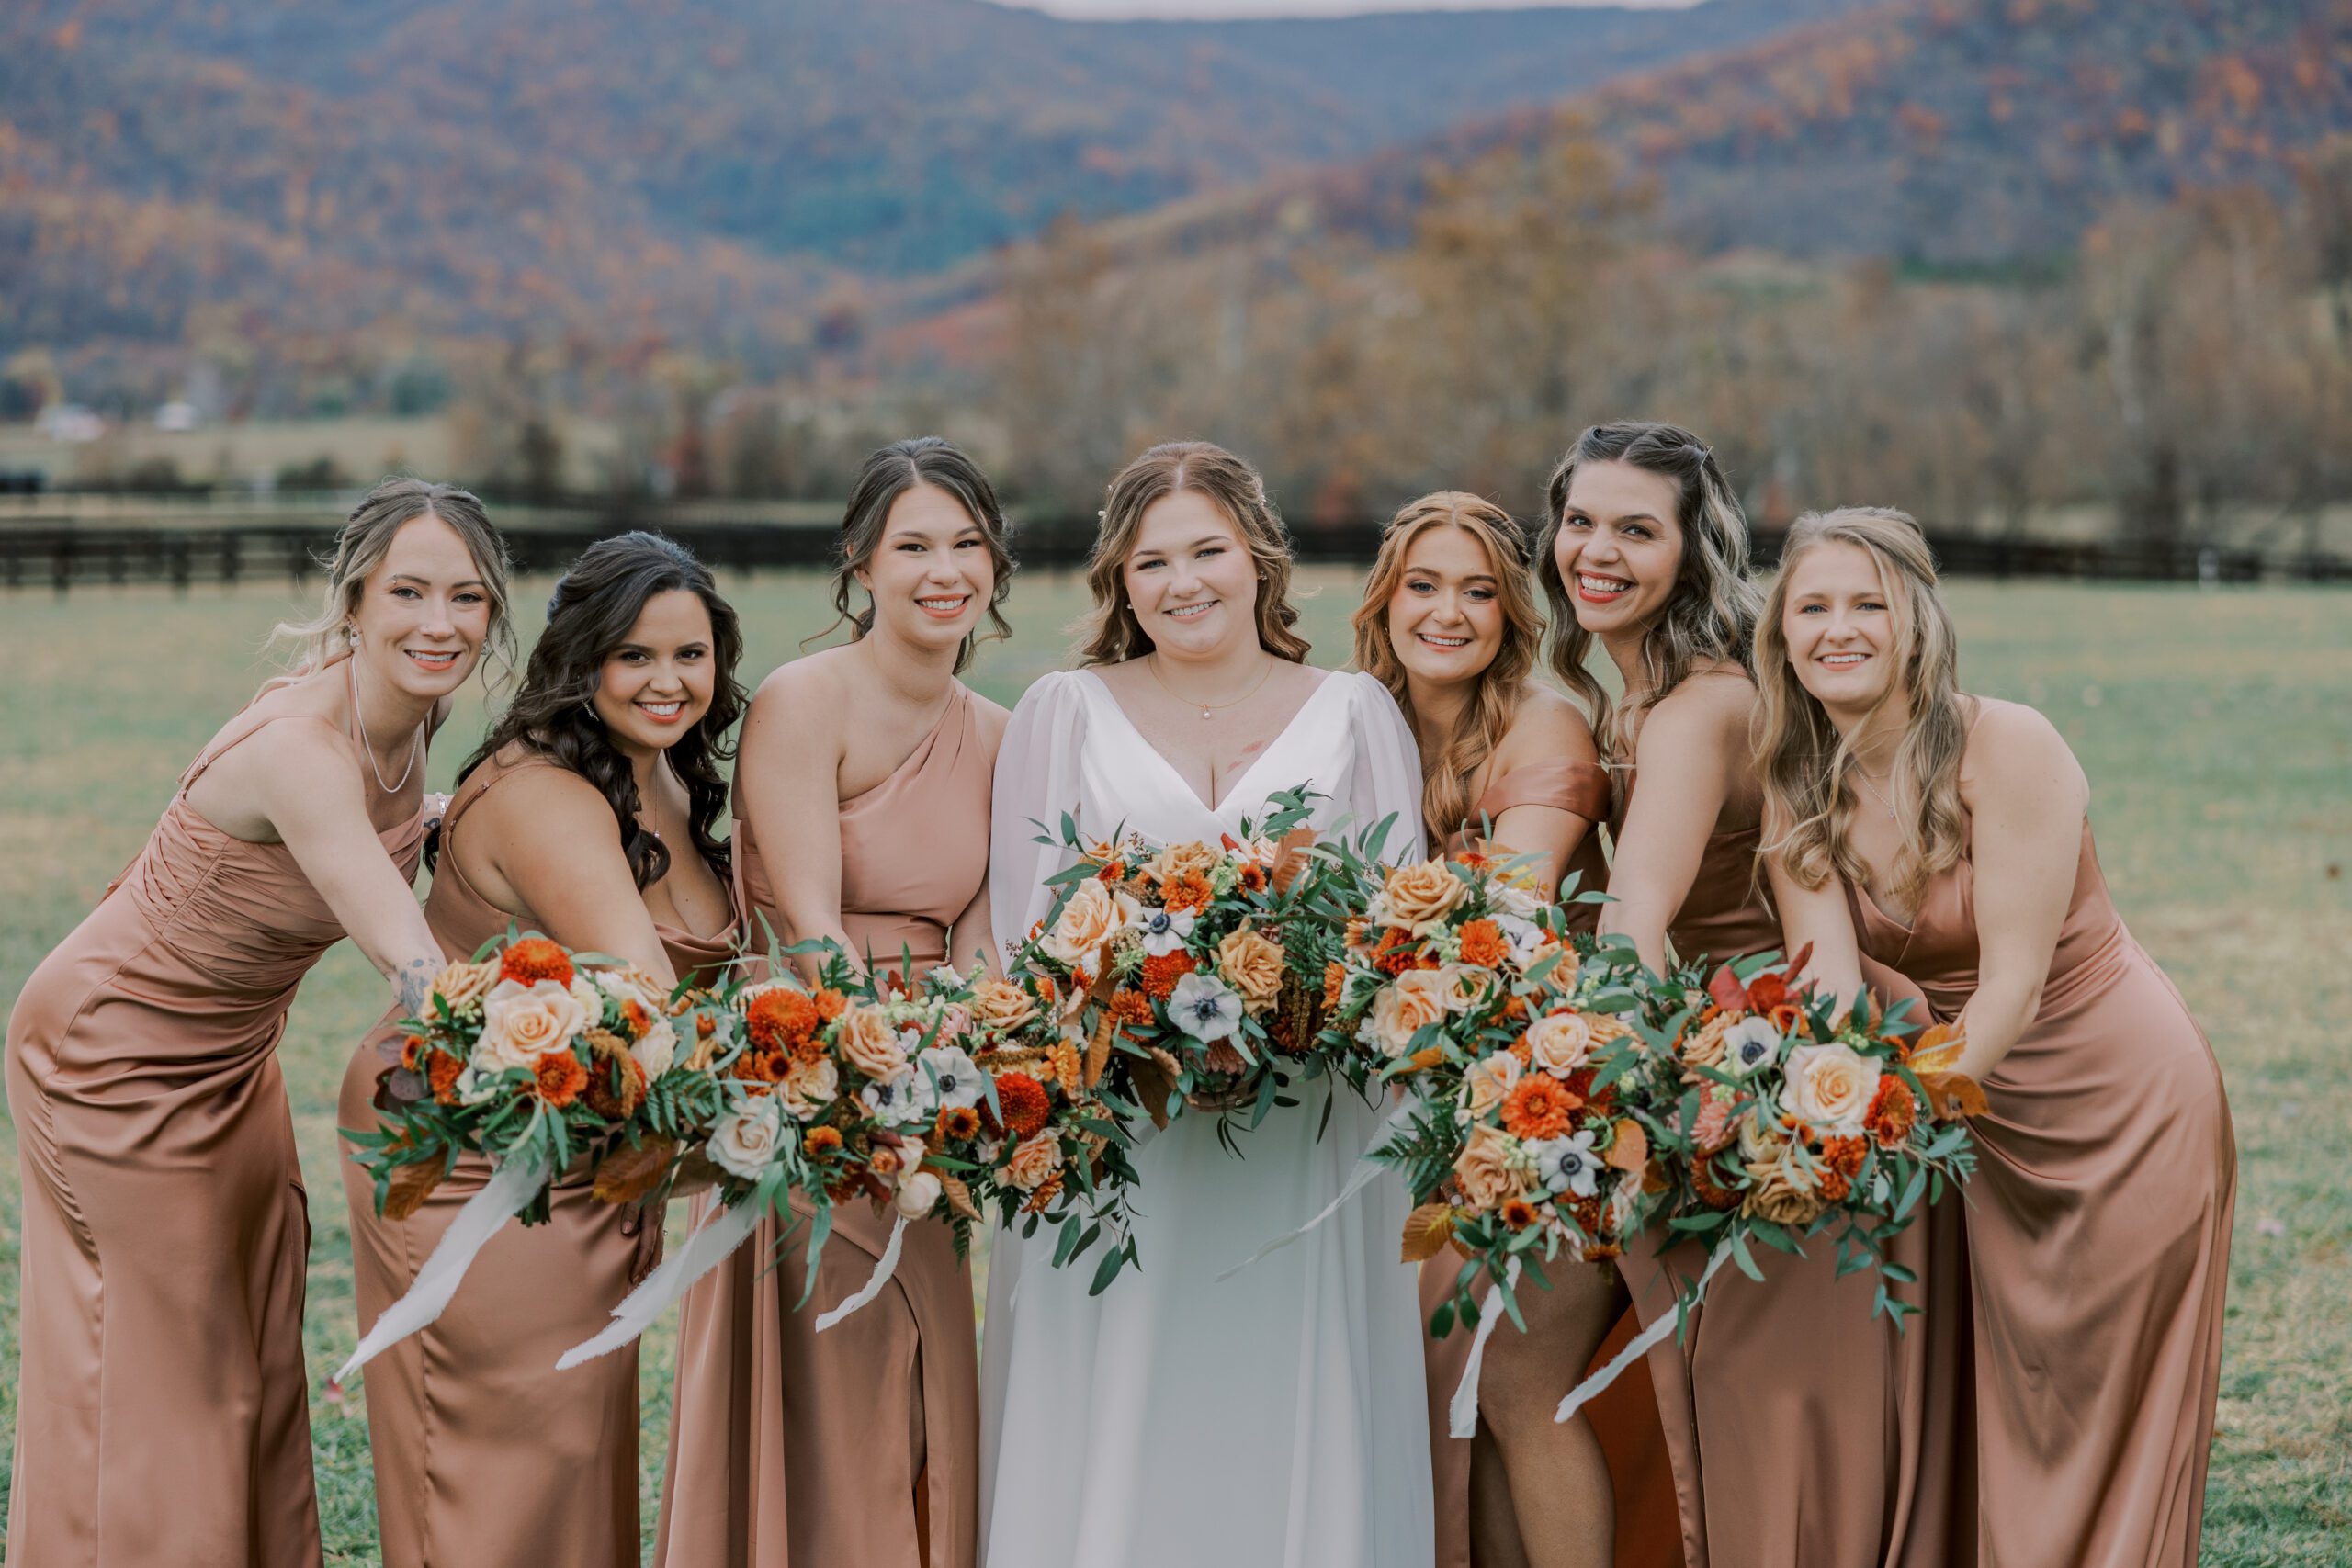 Outdoor photo of bride with her bridesmaids who are wearing light brown dresses, all holding their bouquets together and smiling at camera